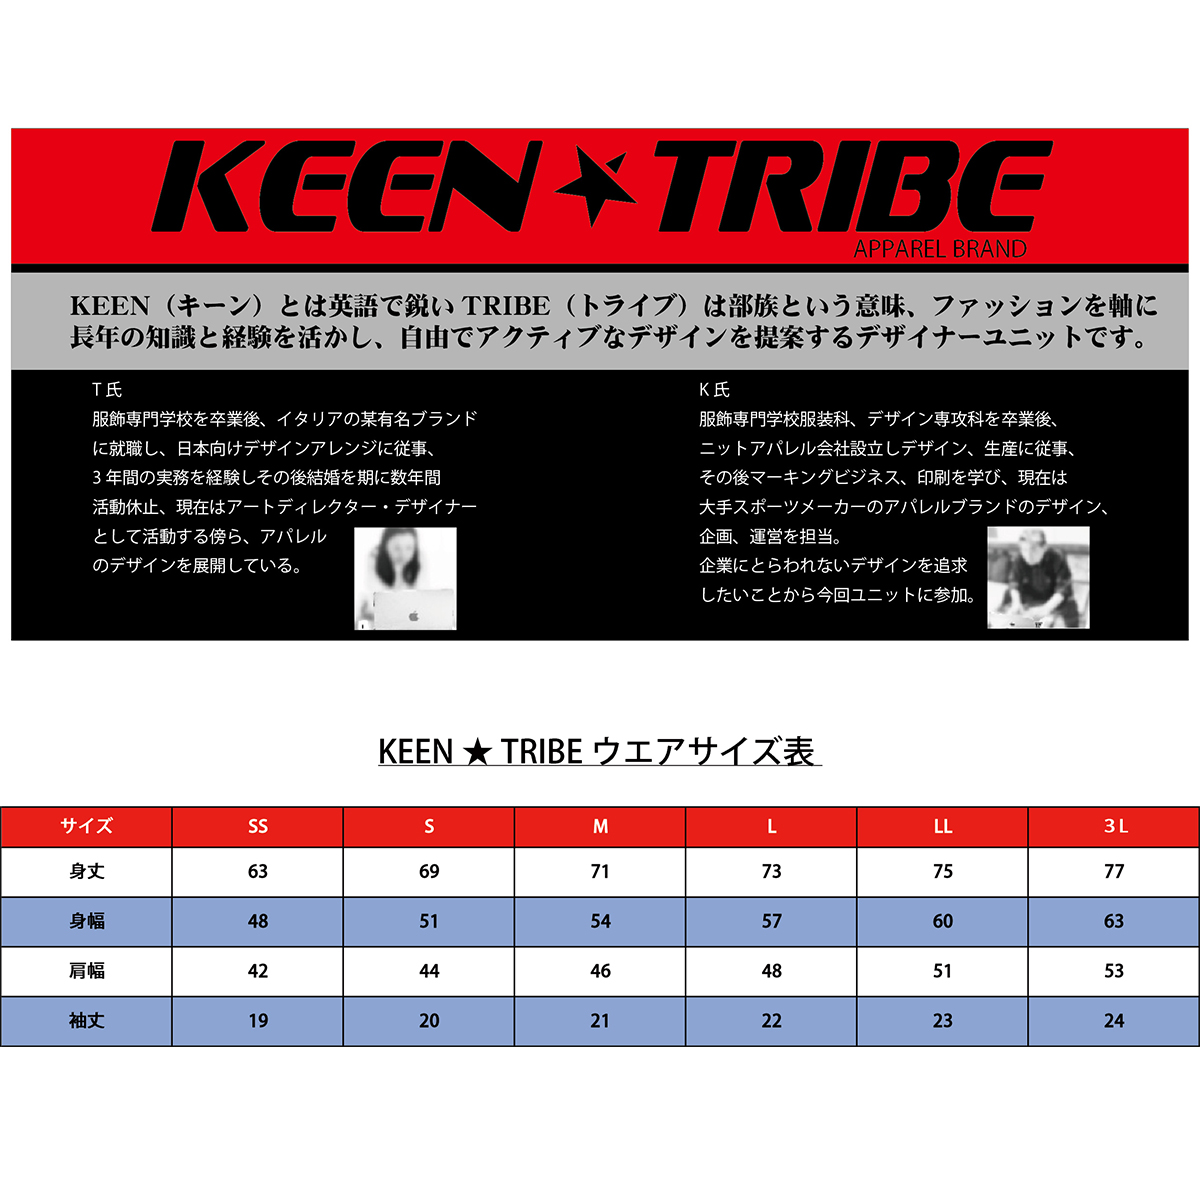 KEEN ★ TRIBE　KT-72(受注生産)